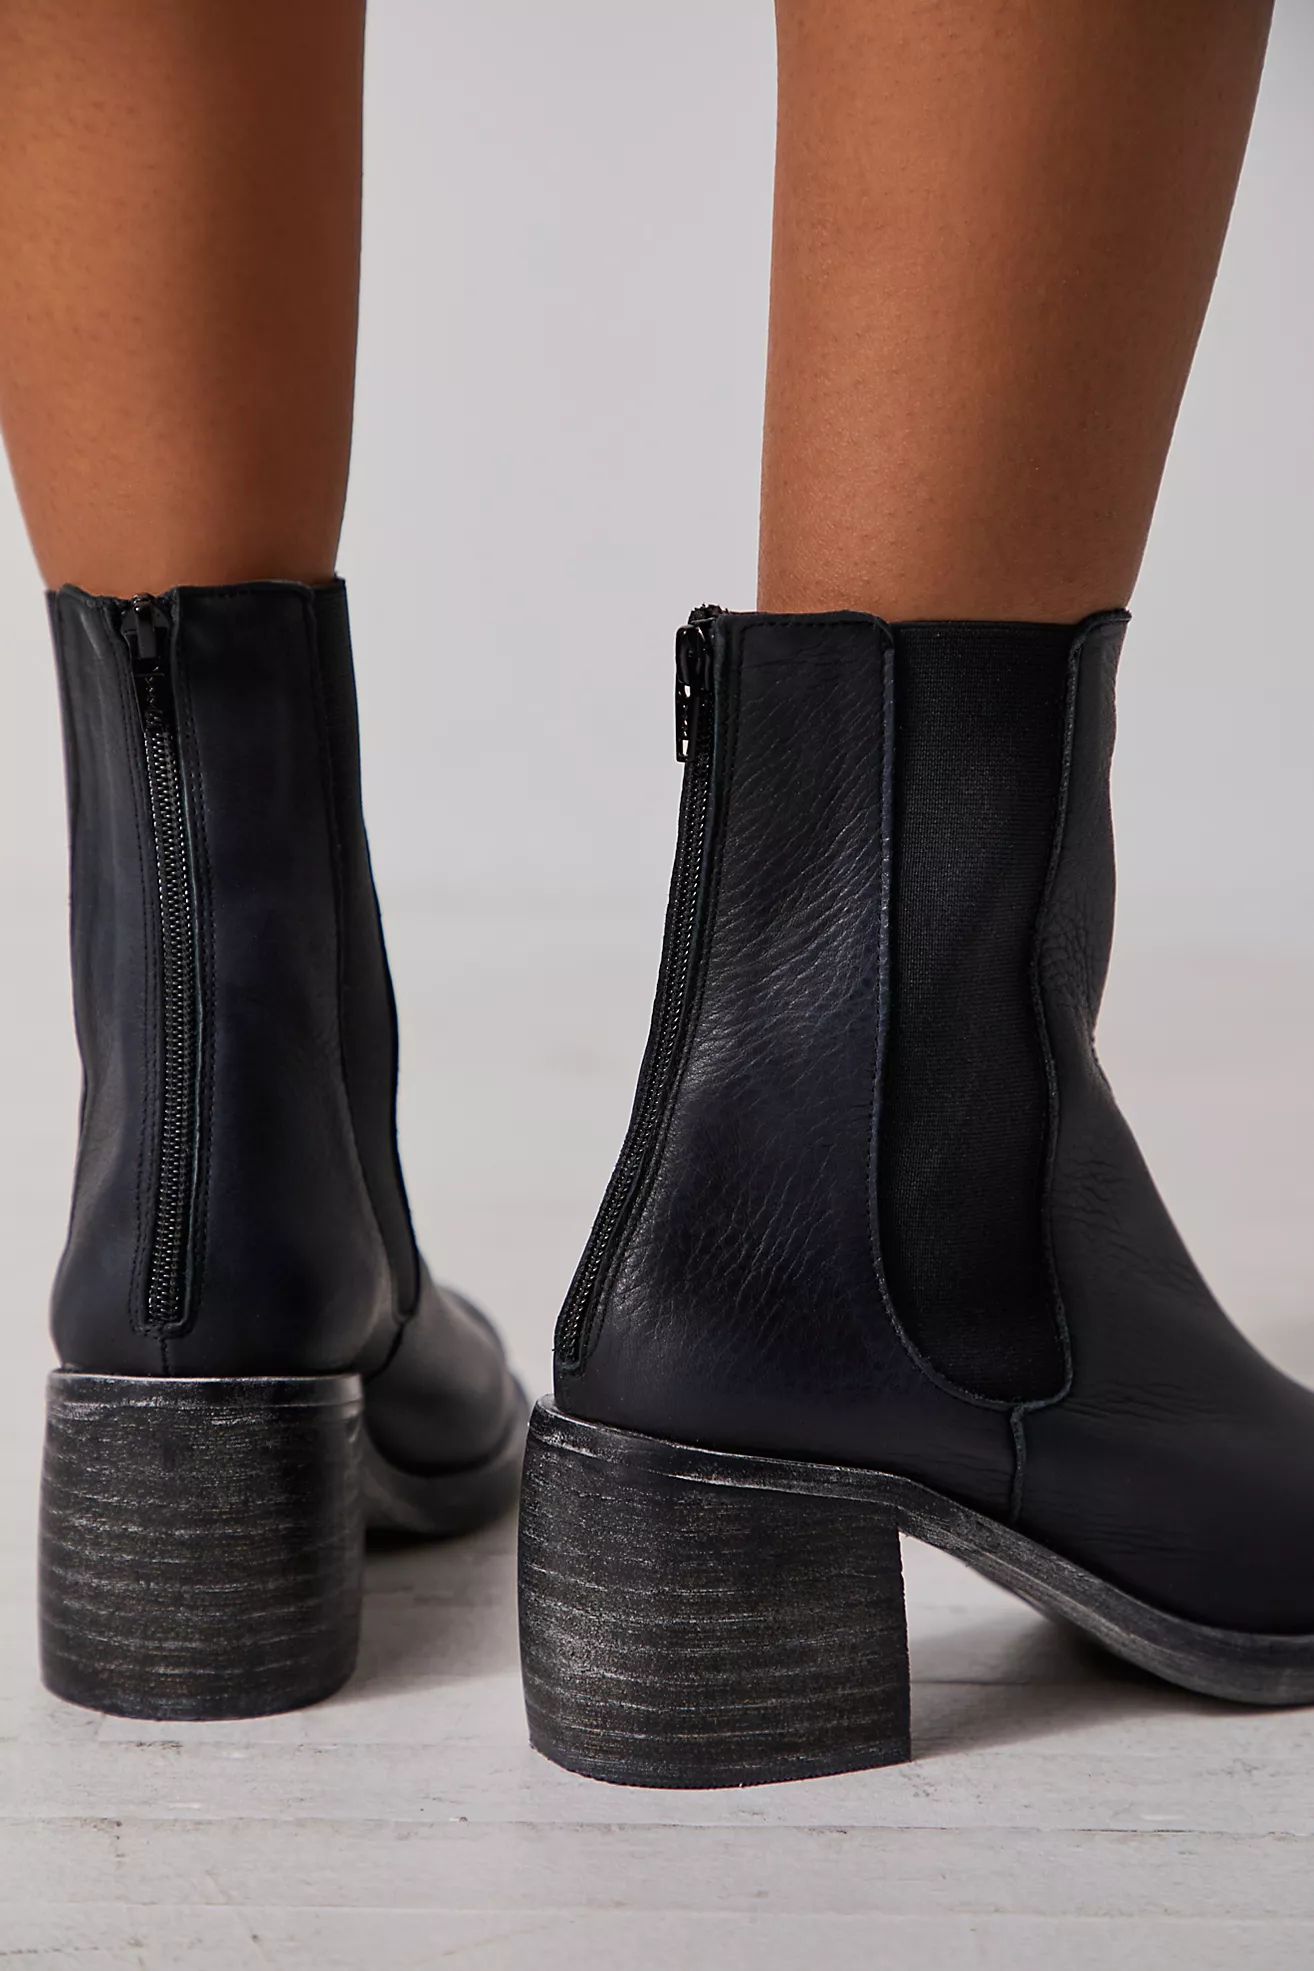 Essential Chelsea Boots | Free People (UK)